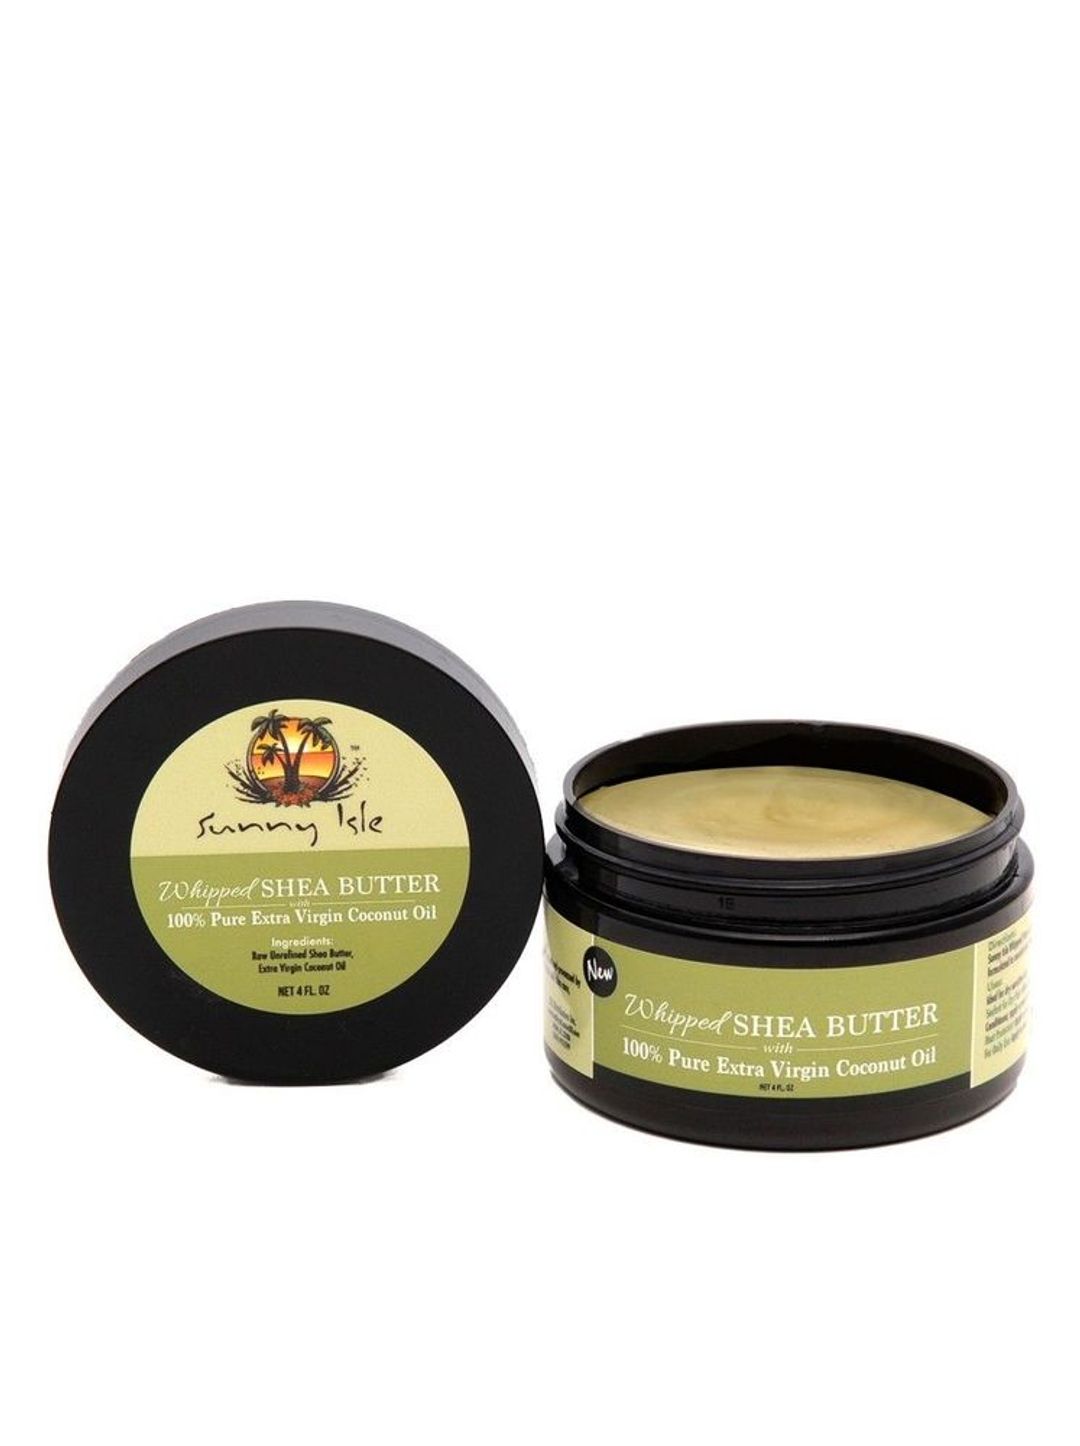 Sunny Isle Whipped Shea Butter With Extra Virgin Coconut Oil - 4oz